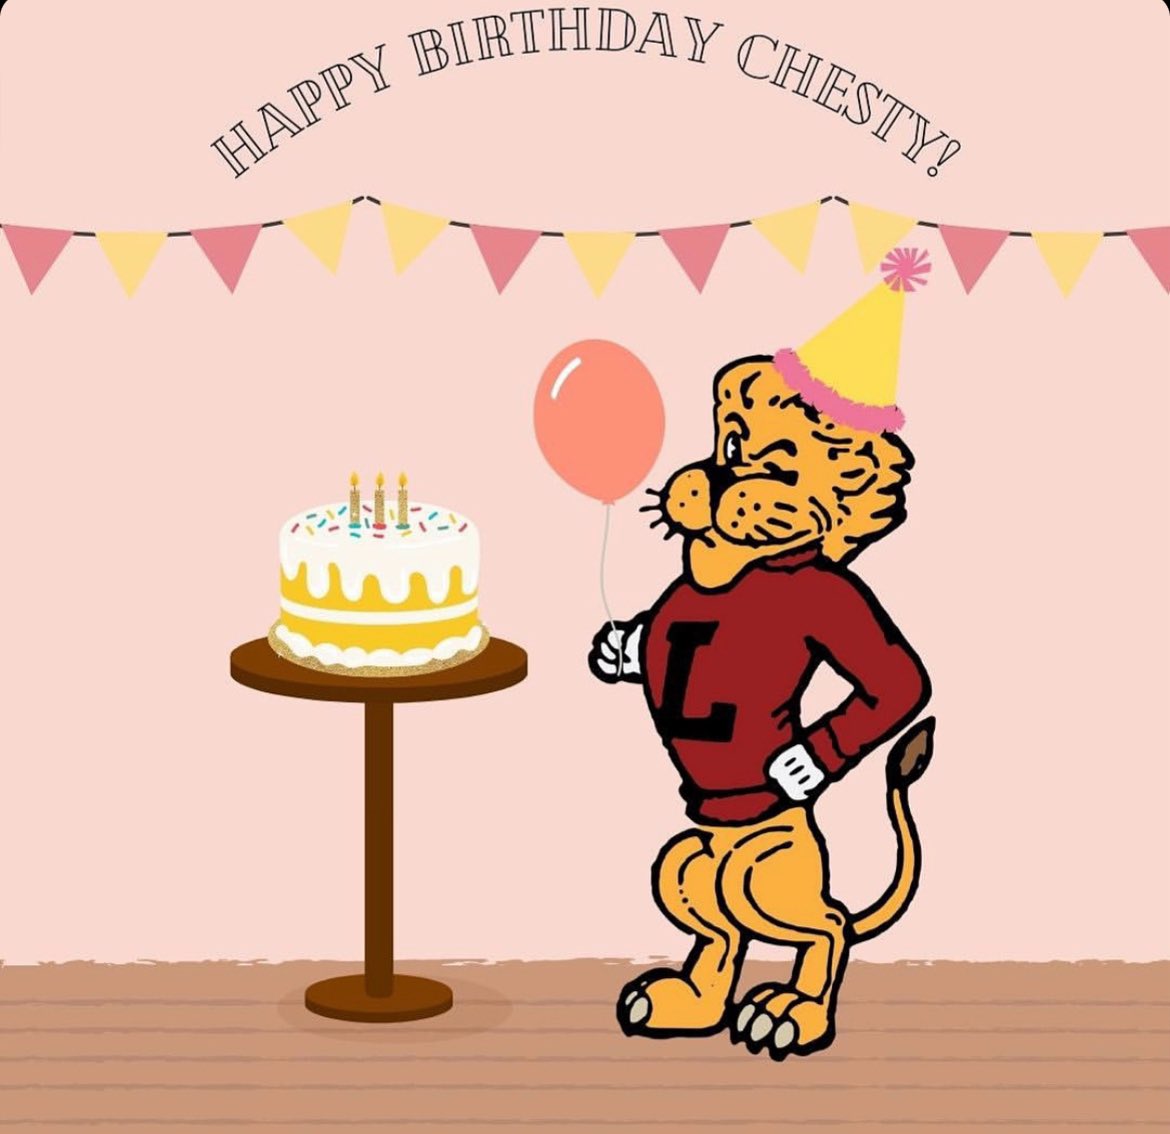 Happy birthday to the most wonderful mascot! Chesty’s birthday is being celebrated today for staff and students in the atrium during lunch!!!